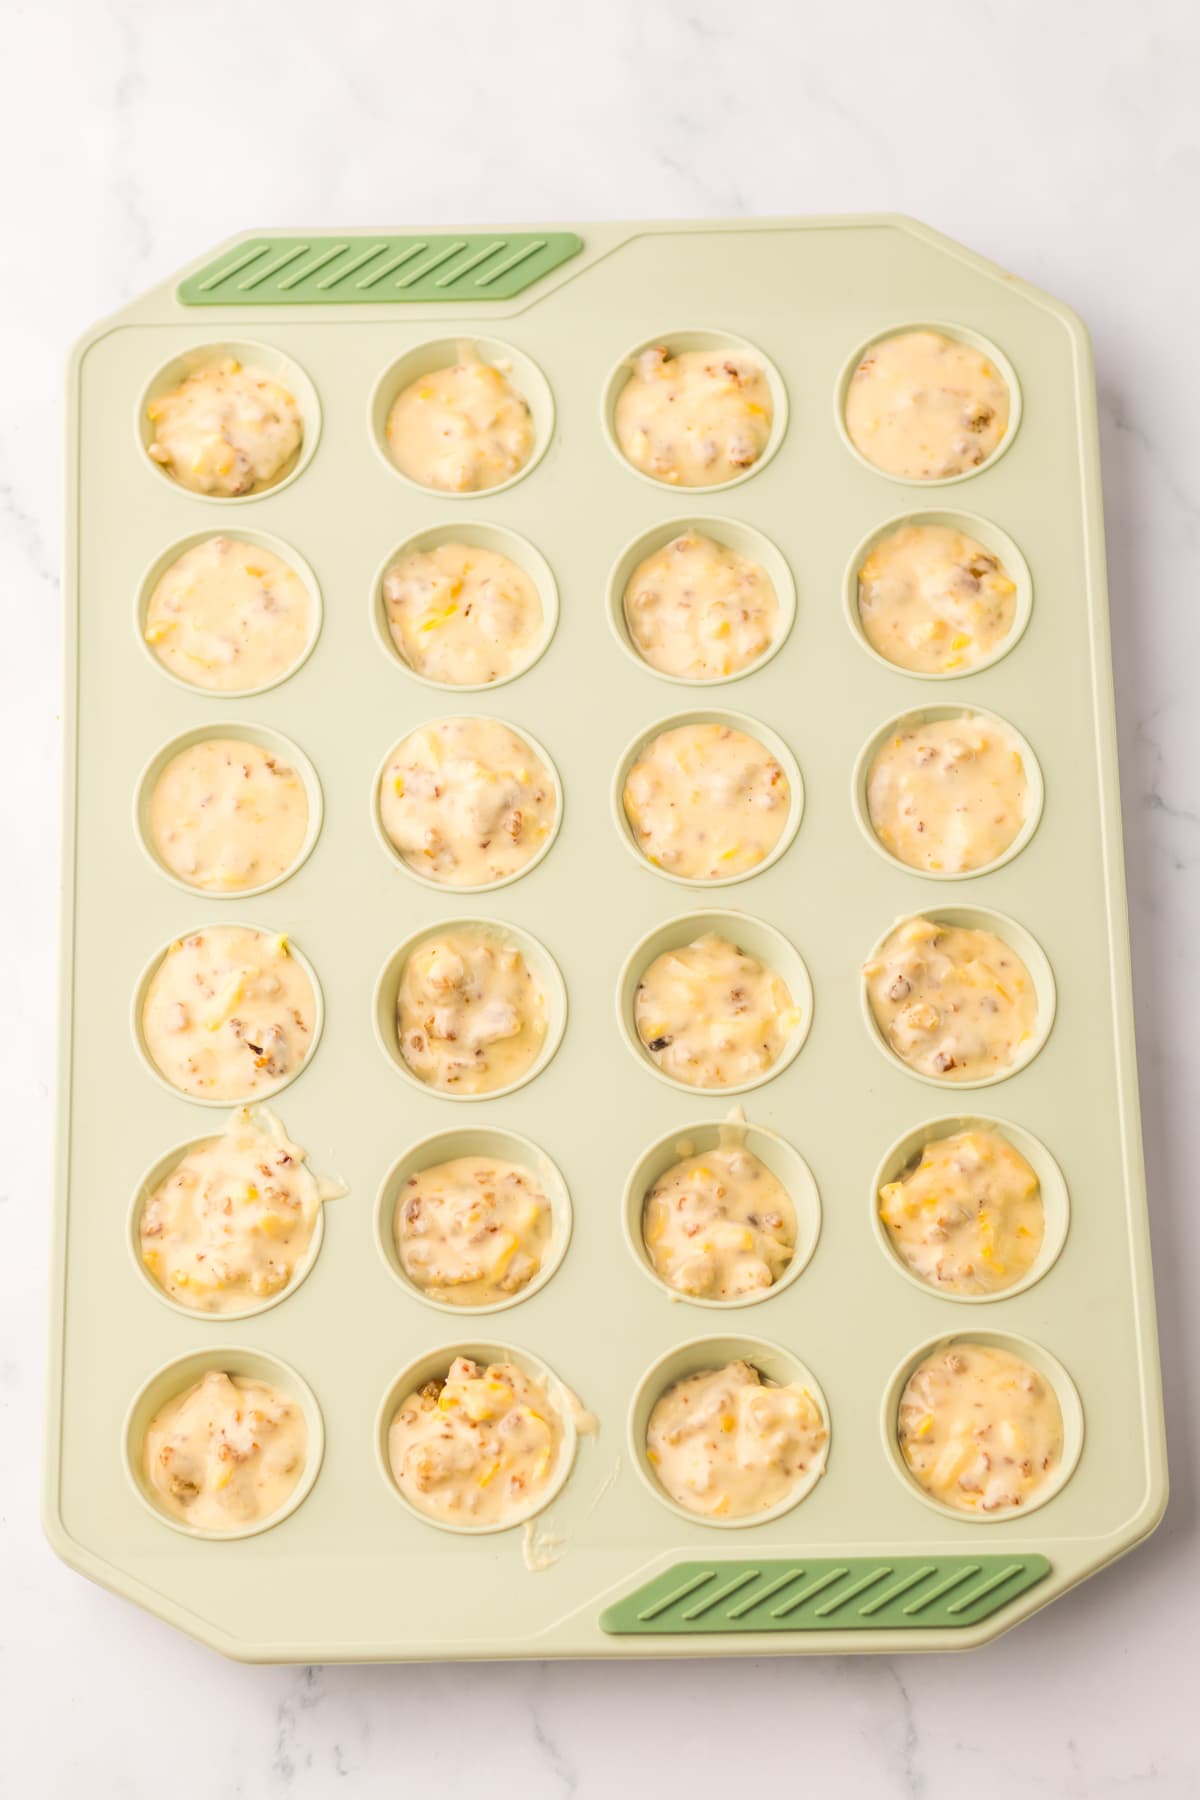 McGriddle Bites in muffin pan ready for oven